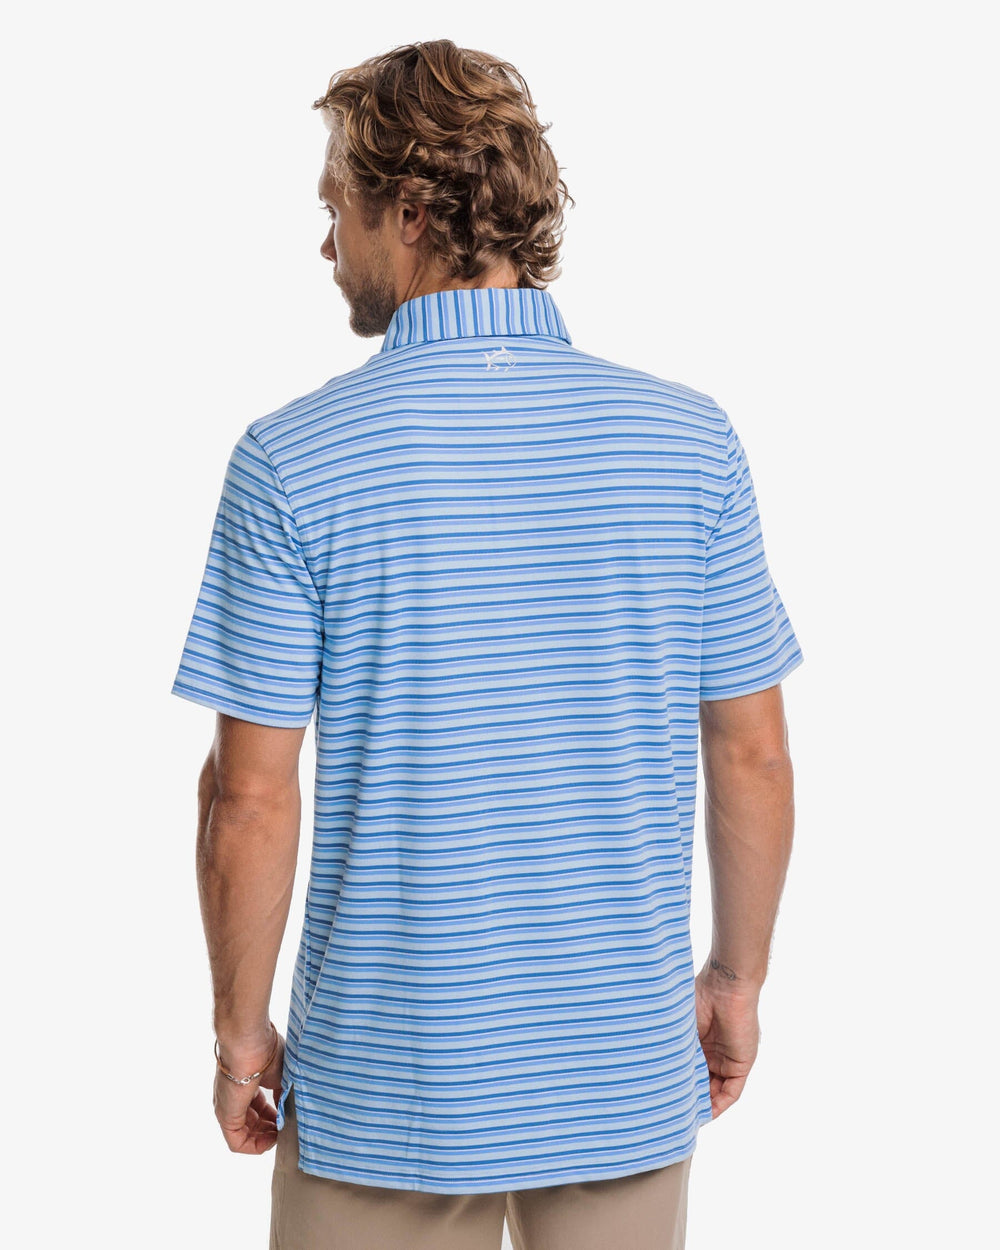 The back view of the Southern Tide Ryder Heather Kendrick Performance Polo Shirt by Southern Tide - Heather Rain Water